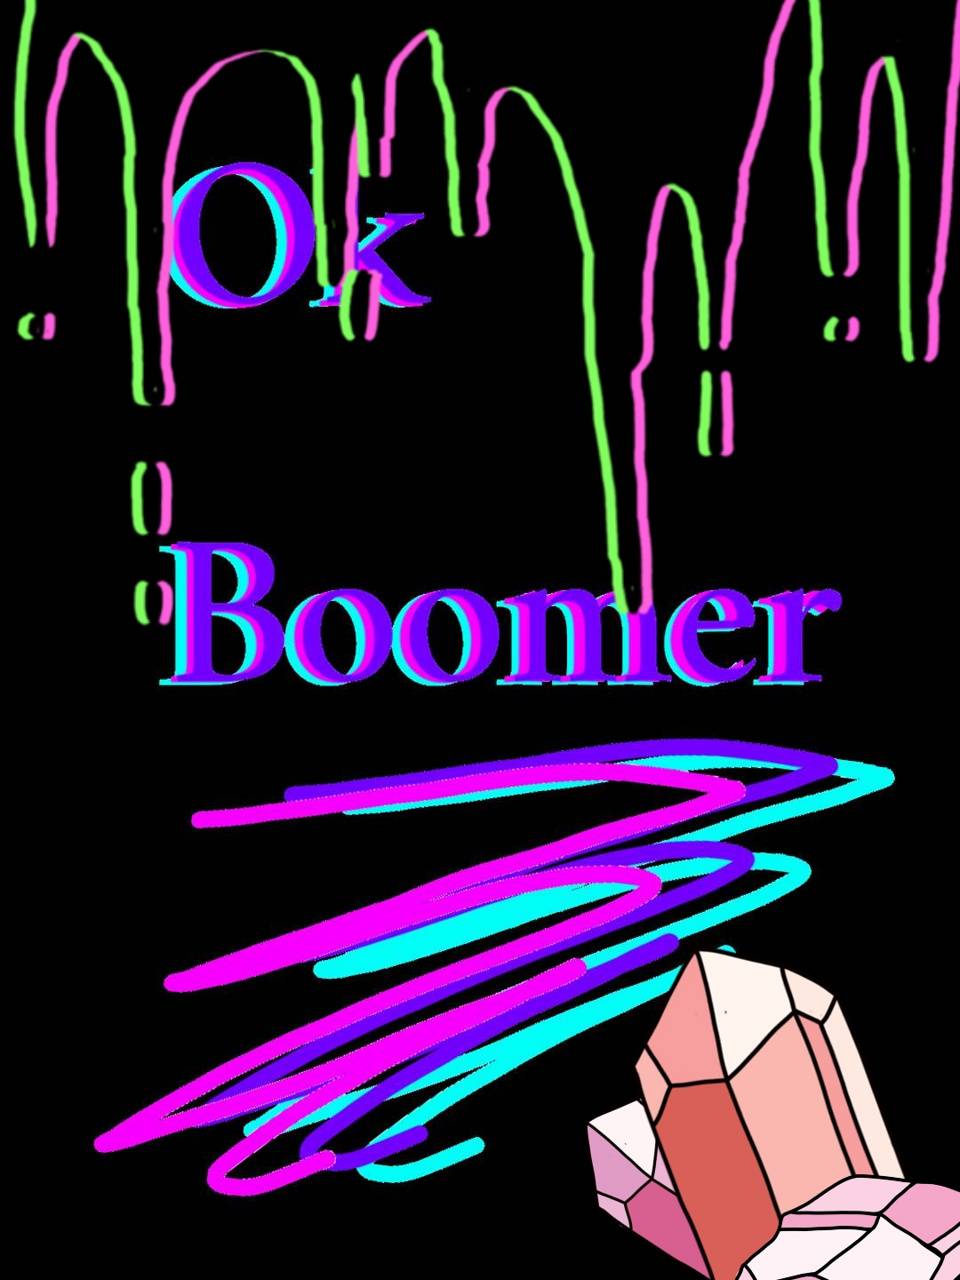 Awesome Ok Boomer Wallpaper For iPhone Photo